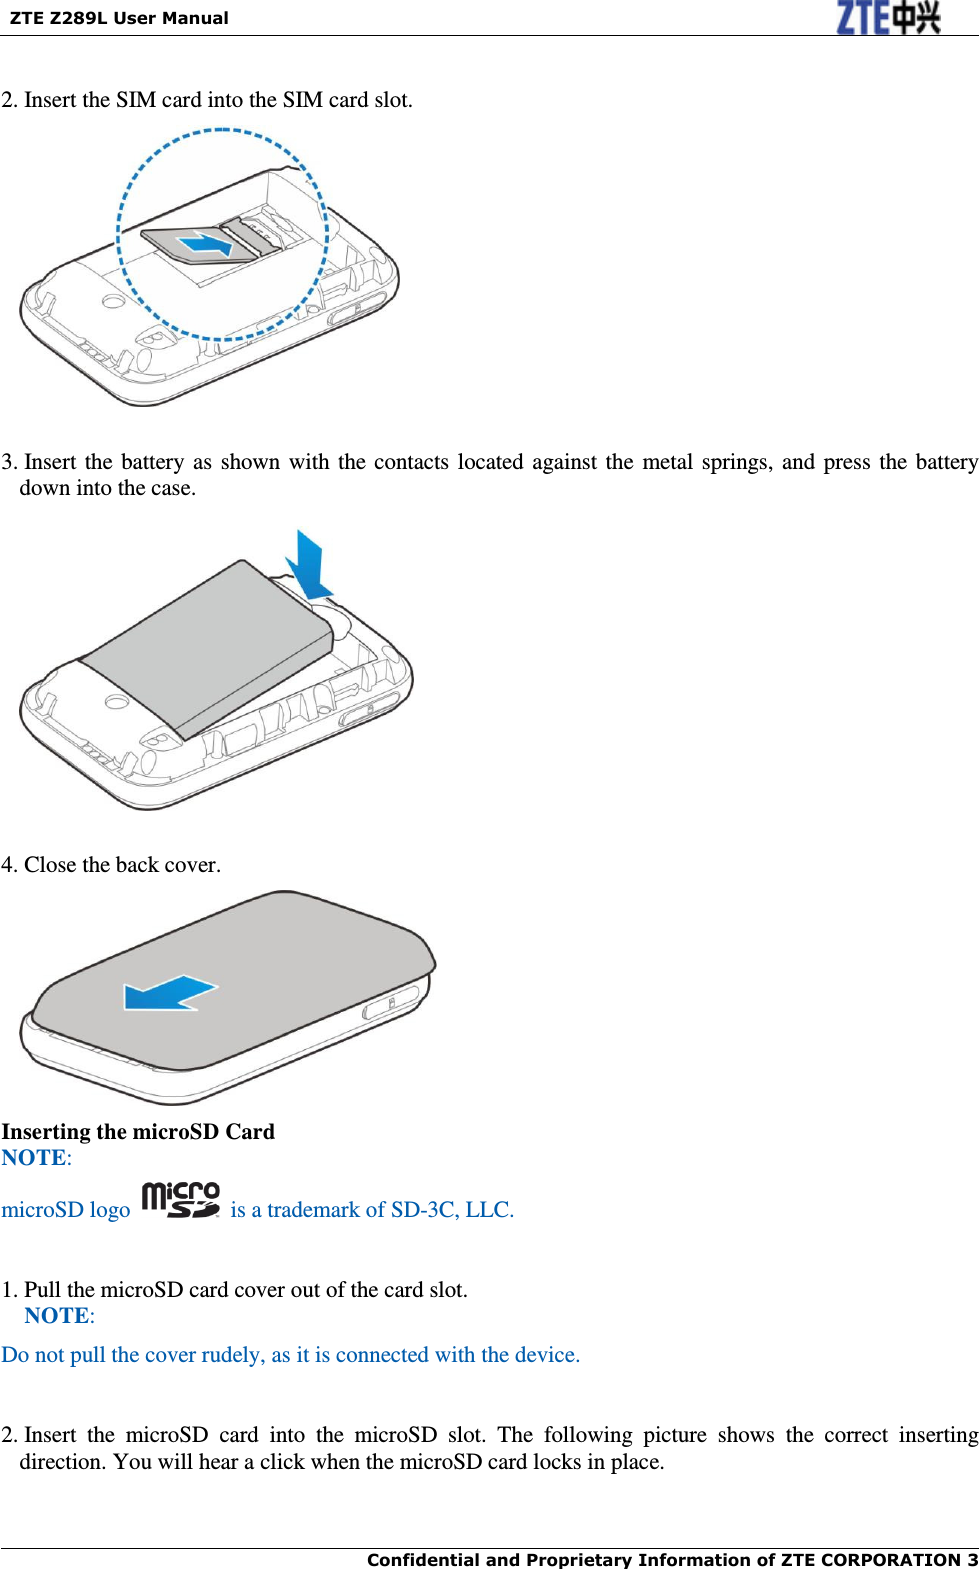   ZTE Z289L User Manual  Confidential and Proprietary Information of ZTE CORPORATION 3     2. Insert the SIM card into the SIM card slot.    3. Insert the battery as shown with the contacts located against the metal springs, and press the battery down into the case.    4. Close the back cover.  Inserting the microSD Card NOTE: microSD logo    is a trademark of SD-3C, LLC.  1. Pull the microSD card cover out of the card slot. NOTE: Do not pull the cover rudely, as it is connected with the device.     2. Insert  the  microSD  card  into  the  microSD  slot.  The  following  picture  shows  the  correct  inserting direction. You will hear a click when the microSD card locks in place. 